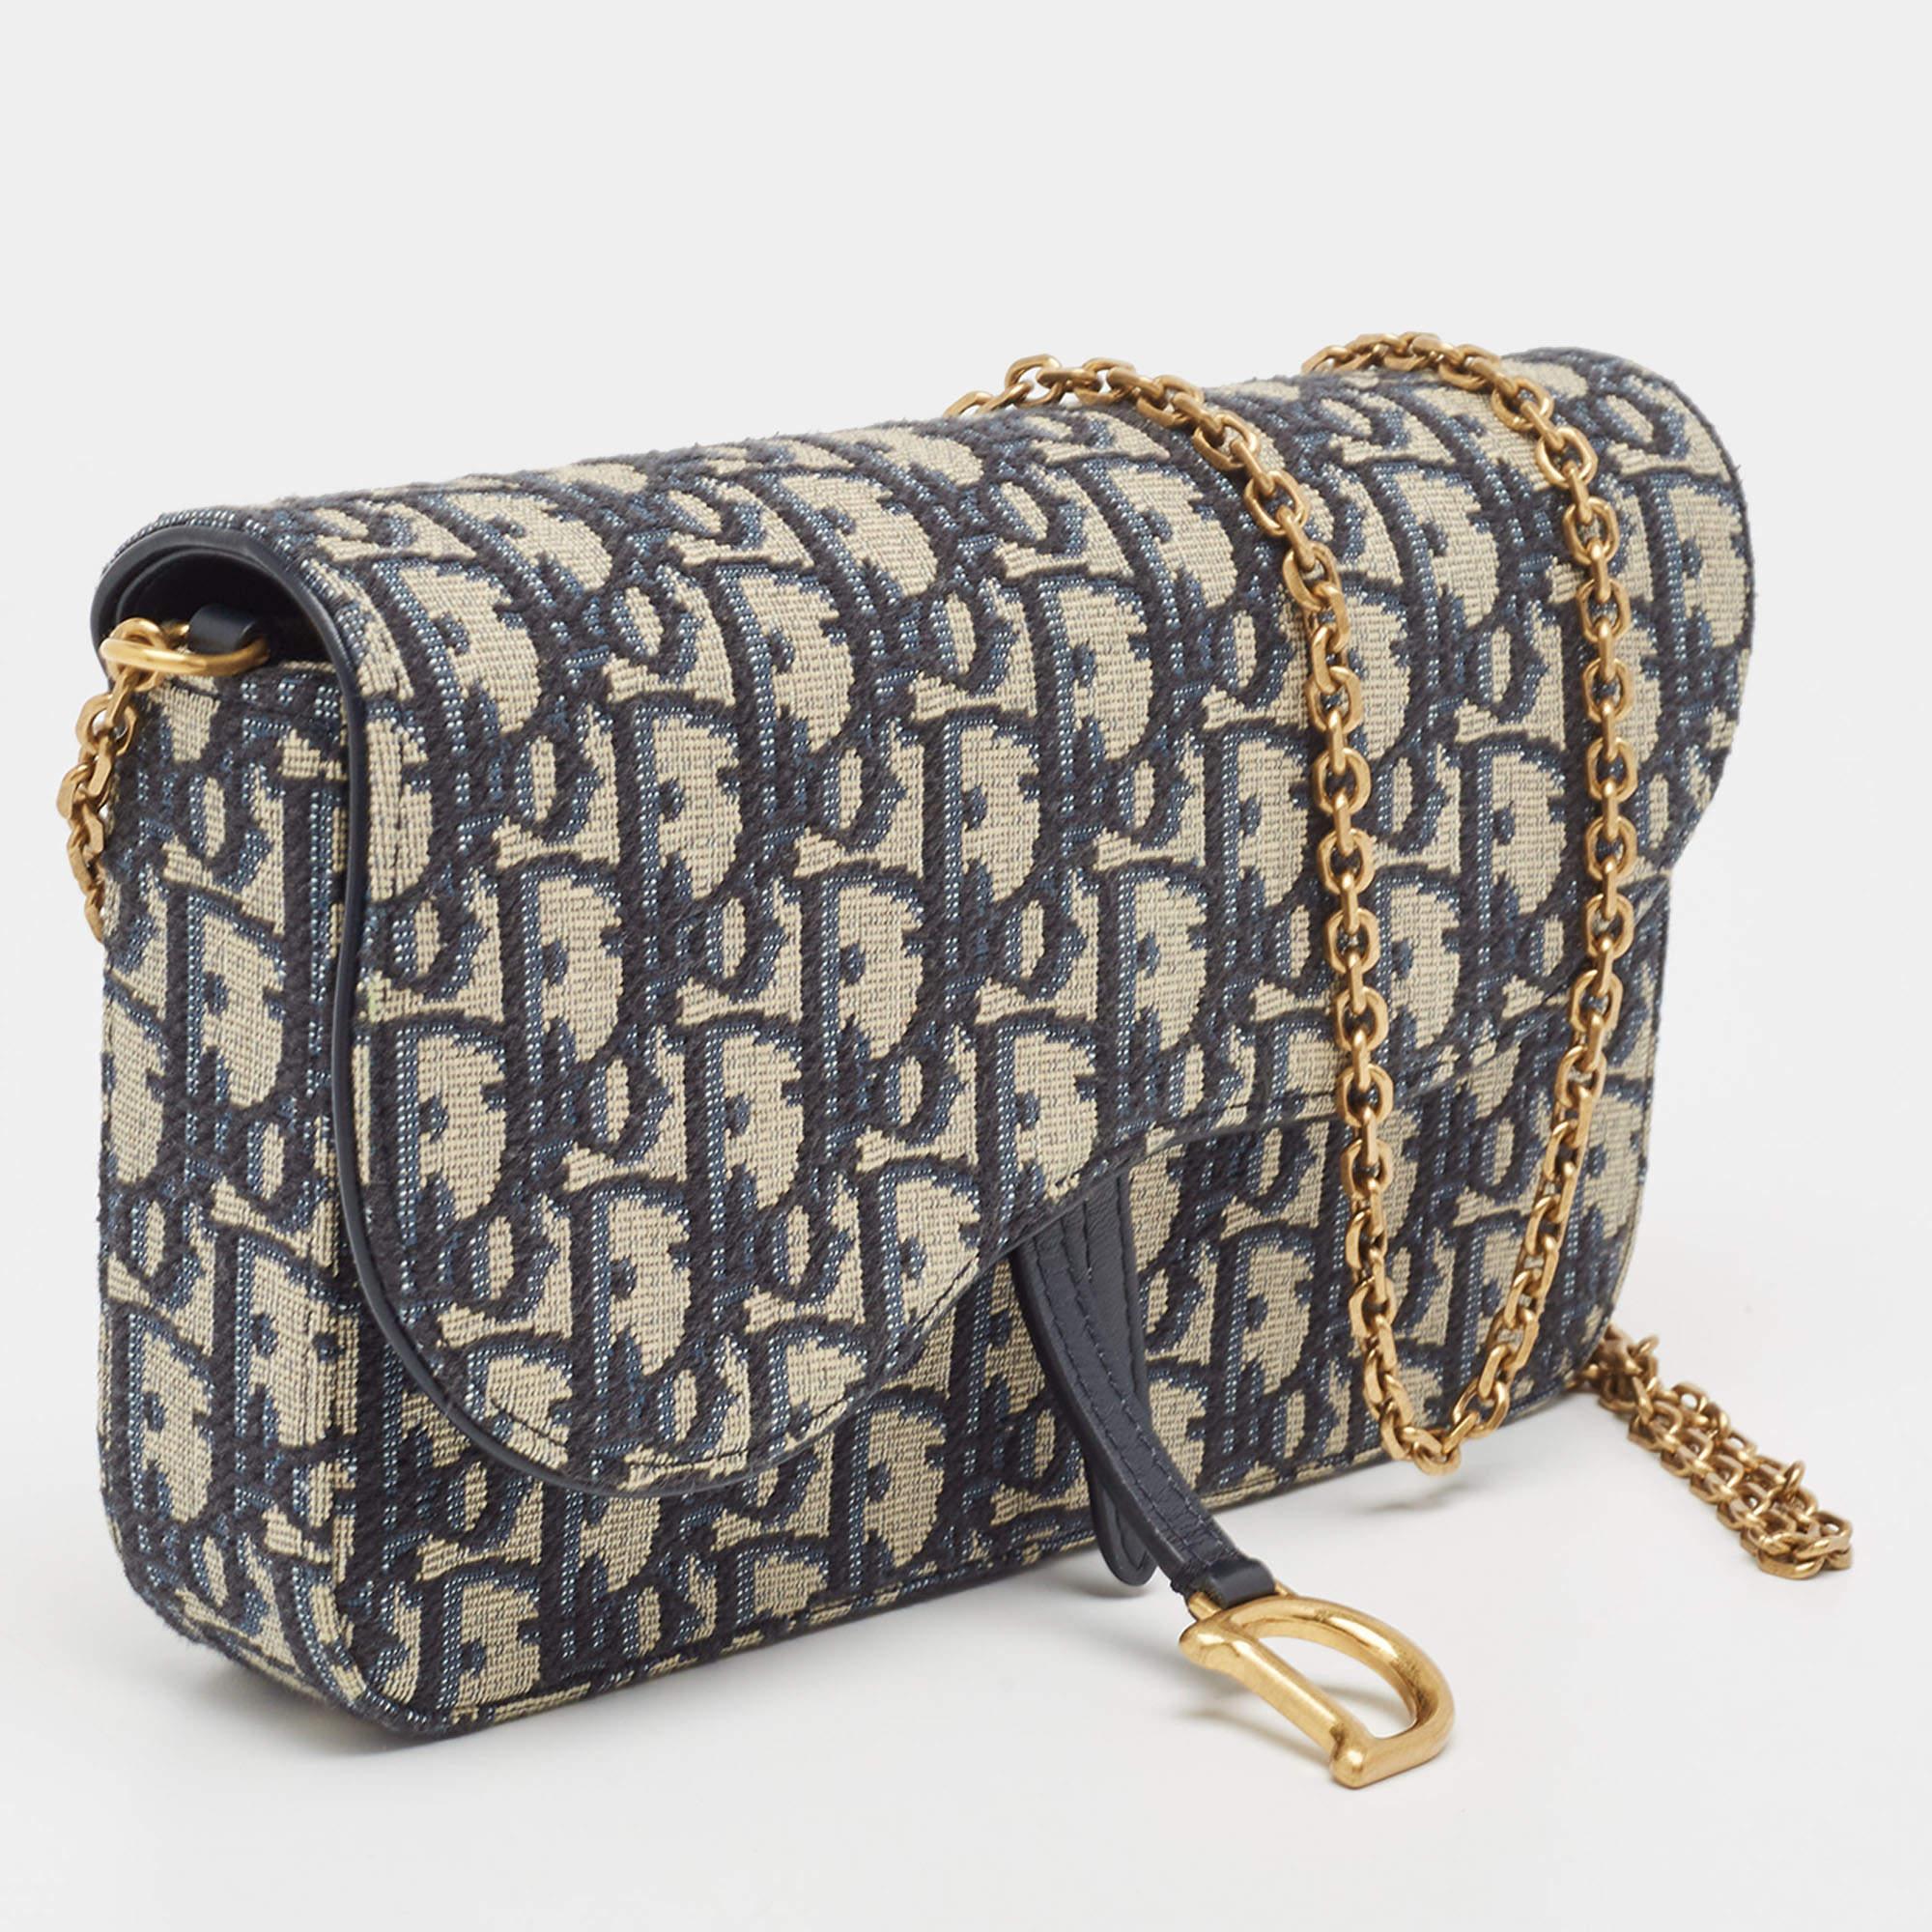 Designed to be carried as a shoulder bag, crossbody bag, or clutch, this Saddle pouch by Dior speaks of all things fashionable. It is made from Oblique canvas and designed in the likeness of the brand's famous Saddle bag. The bag has a removable